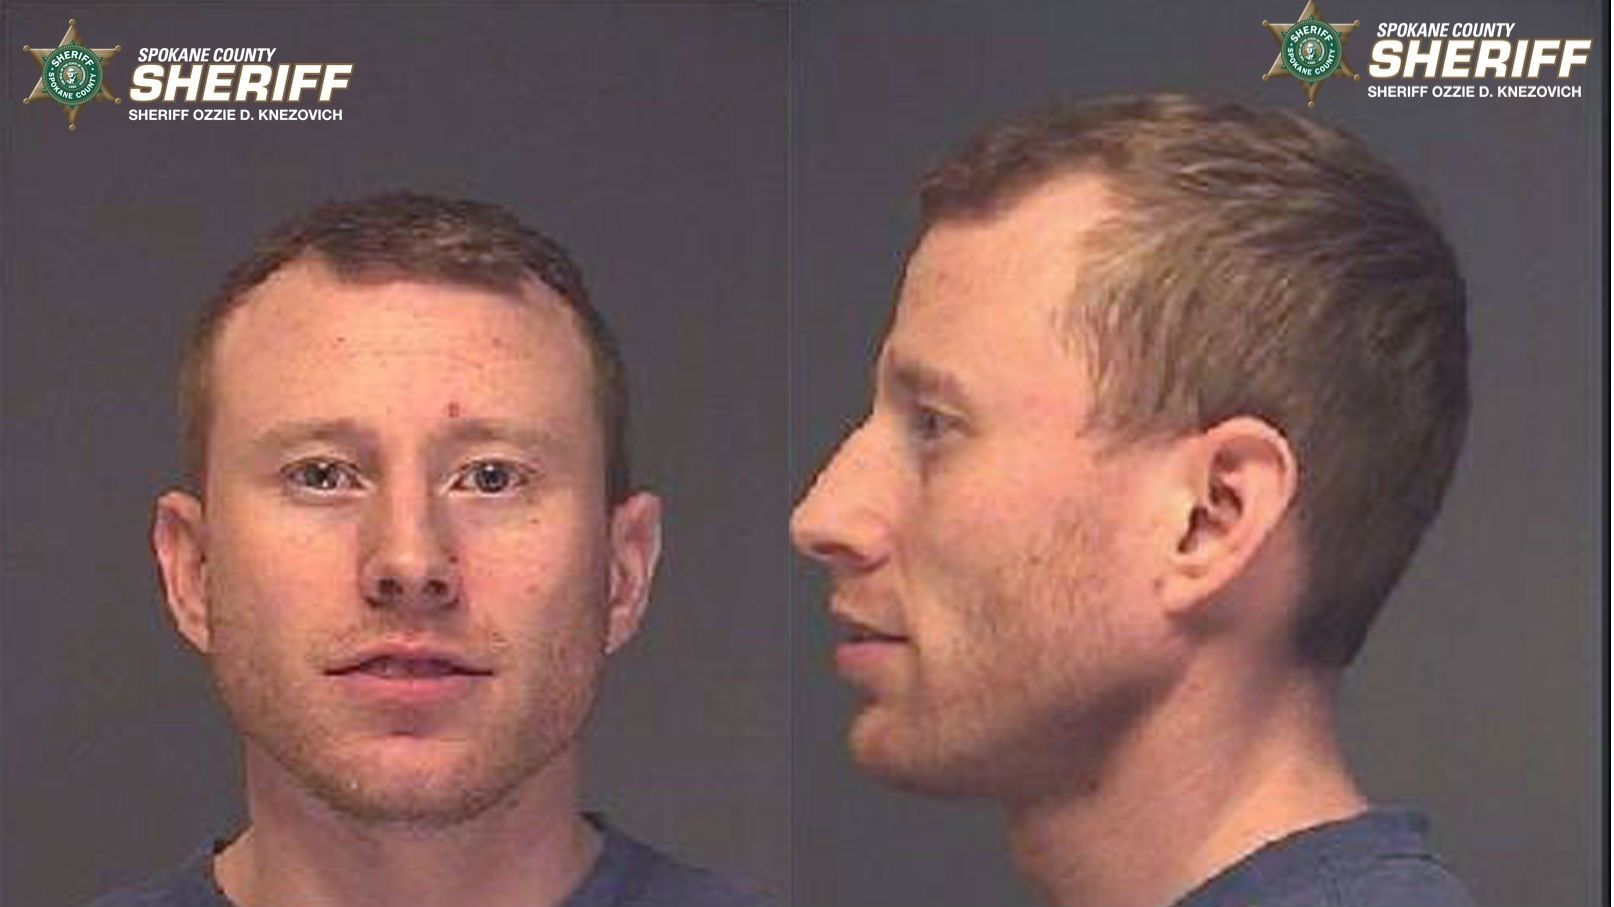 Spokane County Detectives arrest man for child rape and believe there are more victims News pic